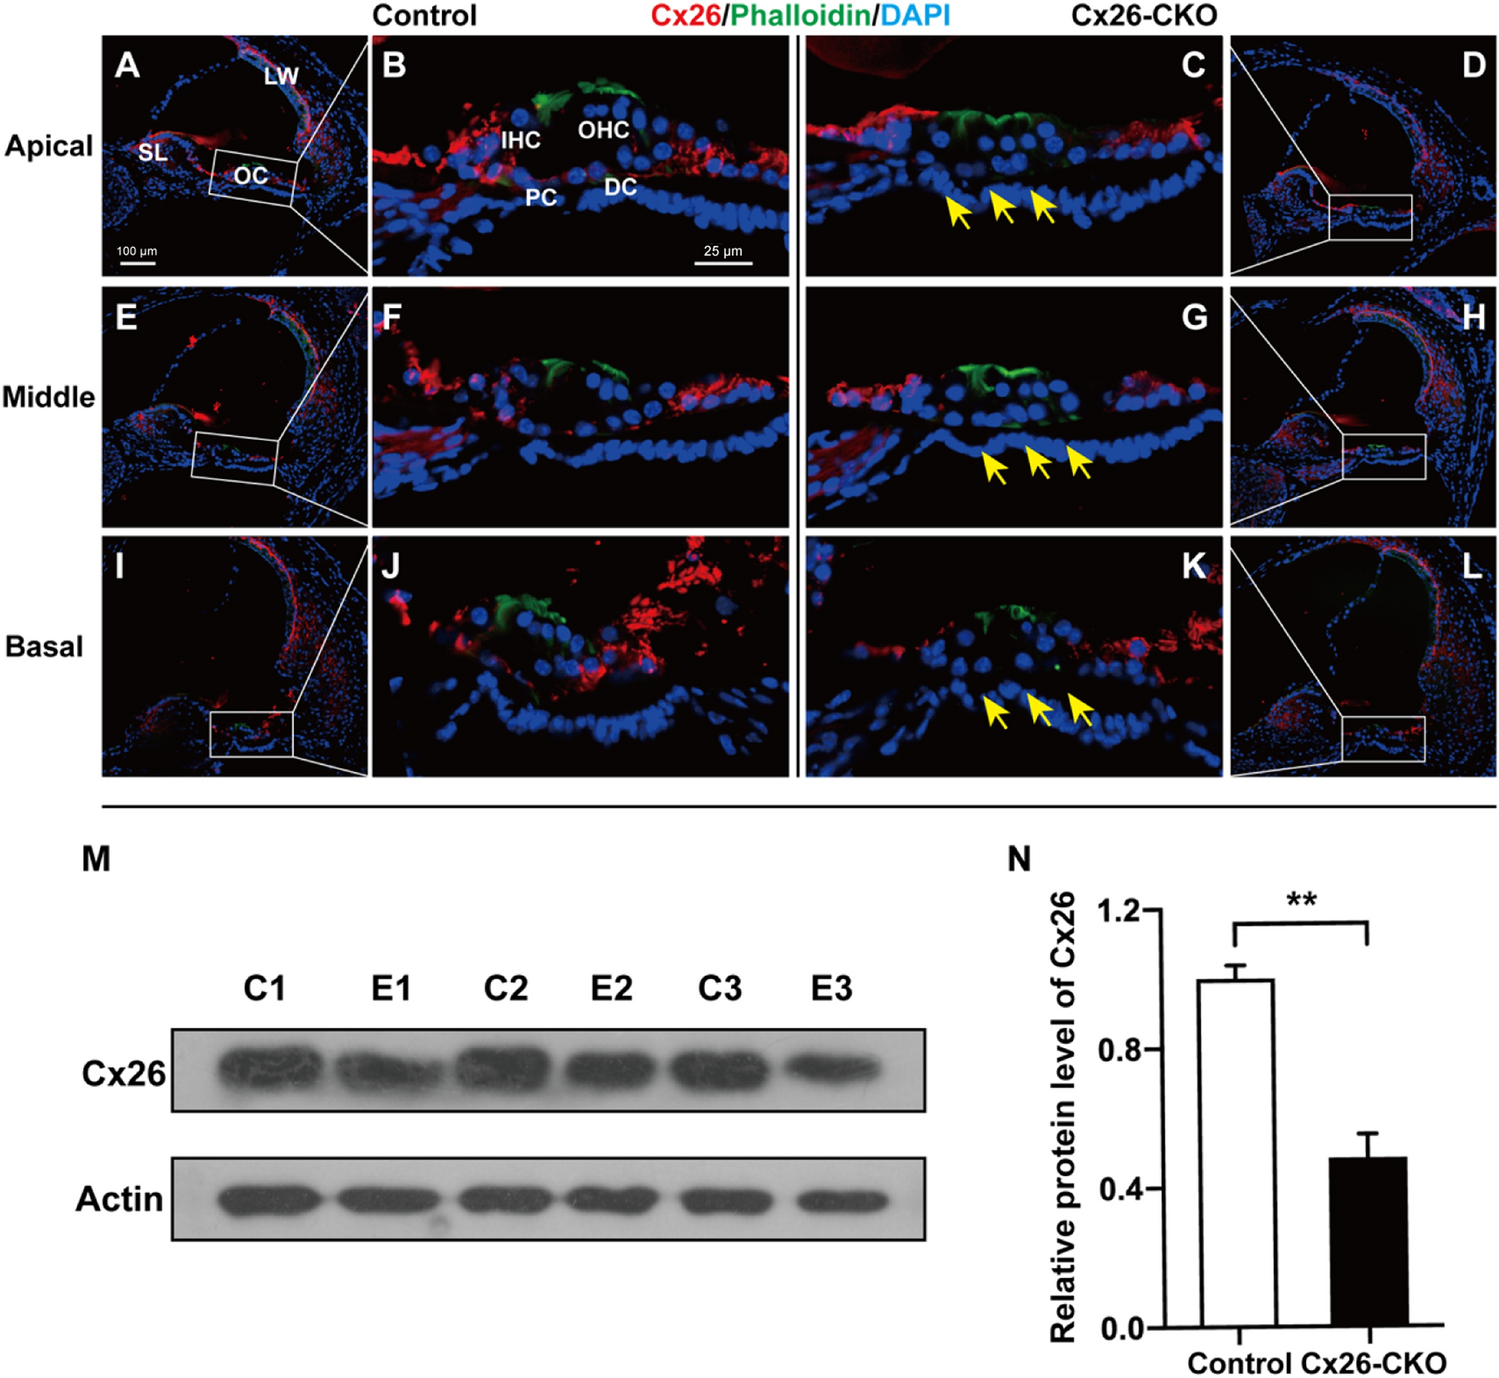 Abnormal Innervation, Demyelination, and Degeneration of Spiral Ganglion Neurons as Well as Disruption of Heminodes are Involved in the Onset of Deafness in Cx26 Null Mice